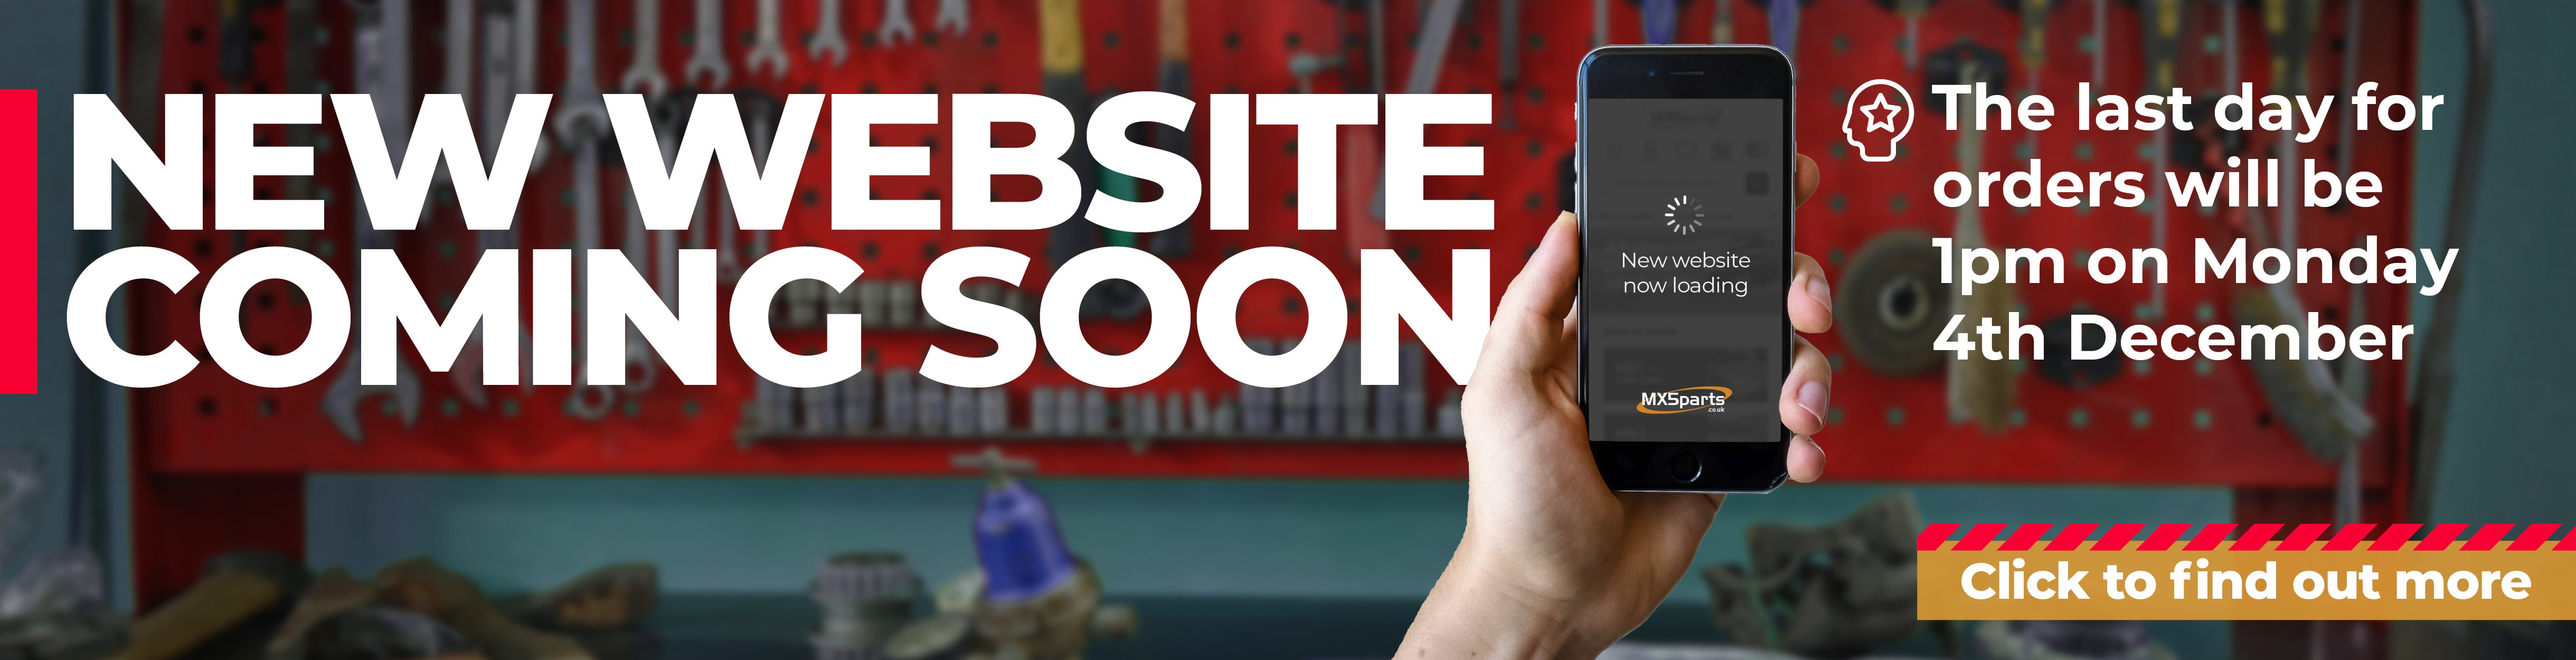 New website coming soon. The last day for orders will be 1pm on Monday 4th December. Click to find out more Text